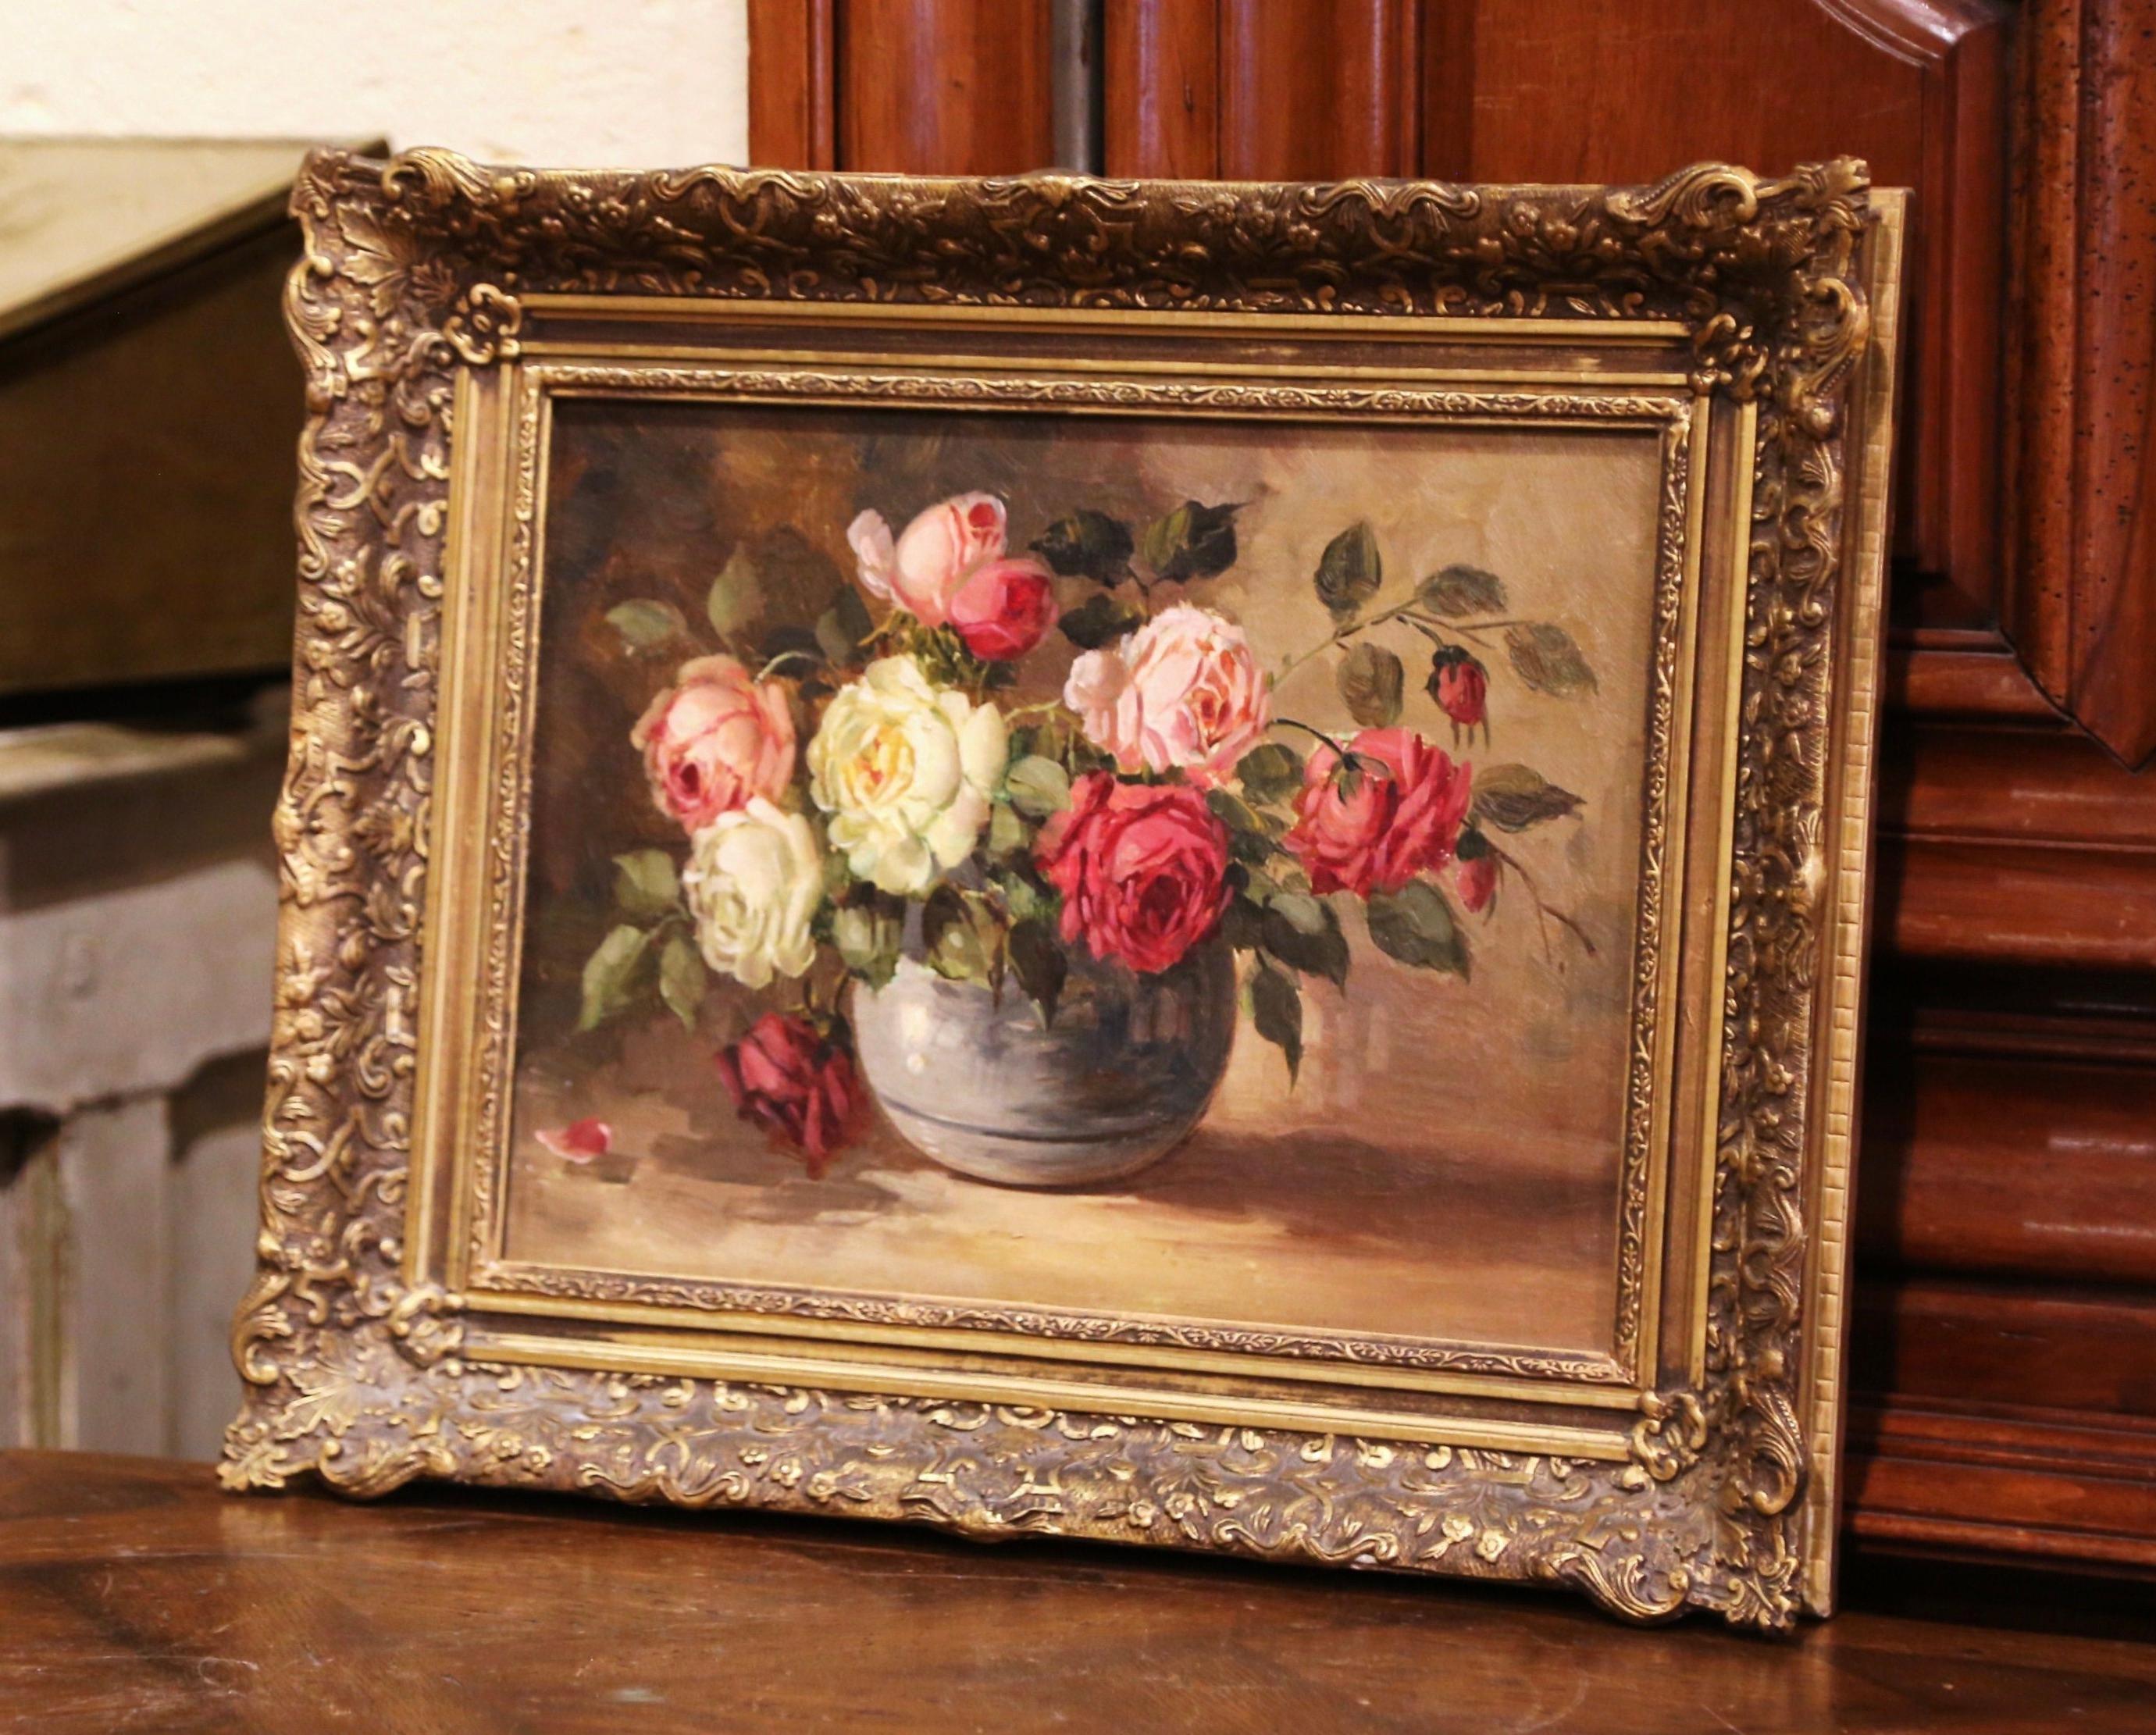 Hand painted in France circa 1880 and set in the original carved giltwood frame, the colorful art work depicts a still life scene with a terracotta cachepot filled with roses and foliage. The painting is in excellent condition with rich colors in